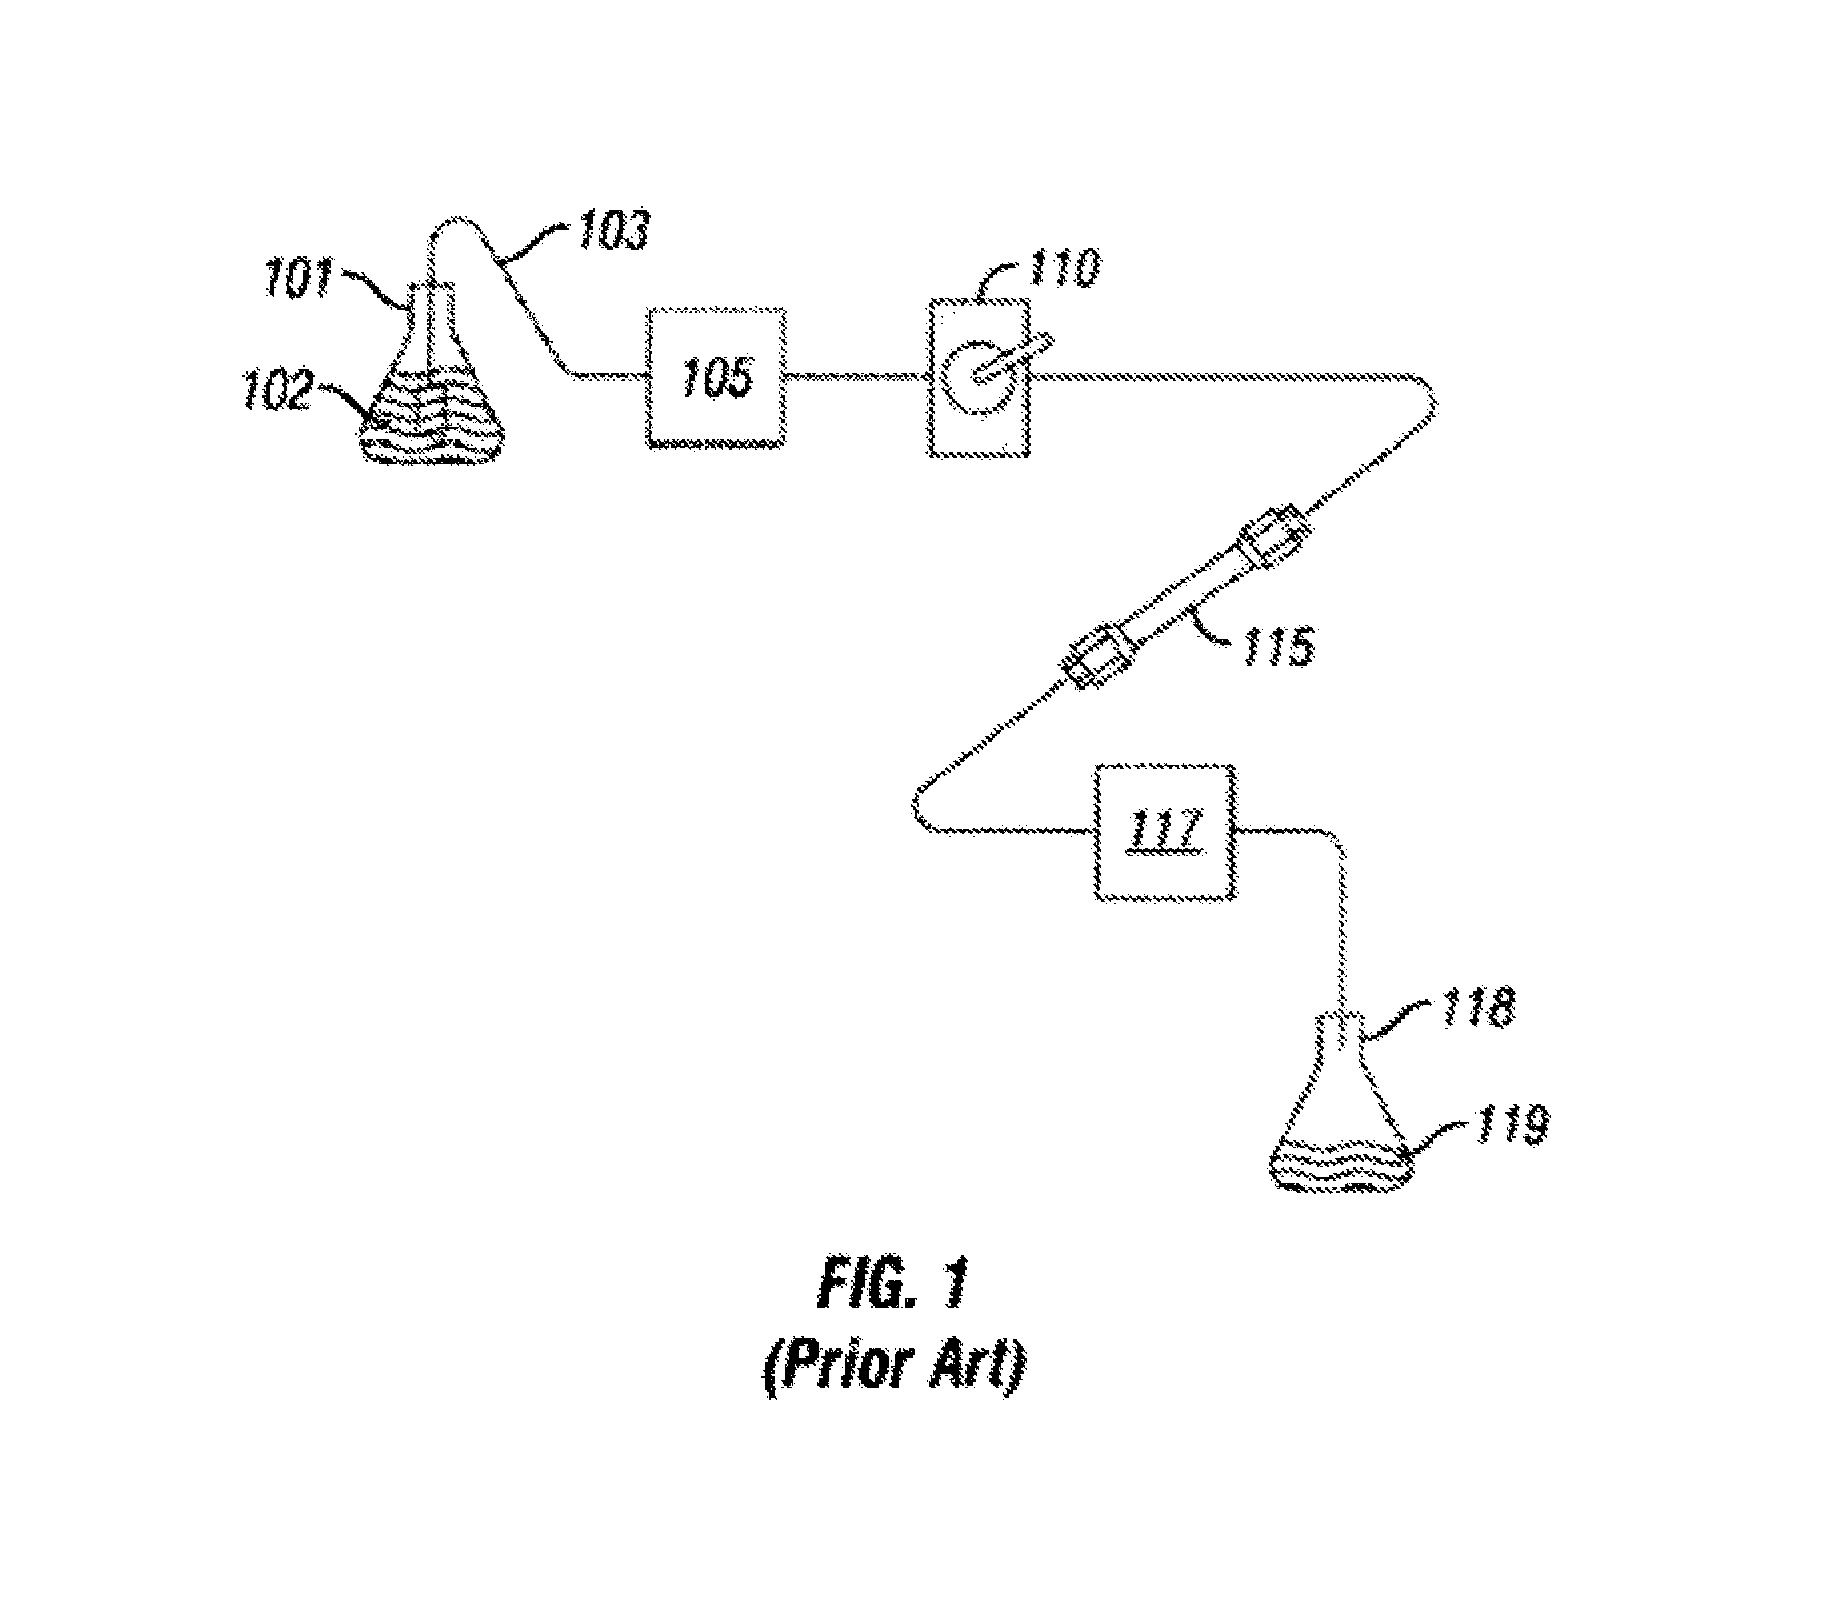 Face-Sealing Fluidic Connection System